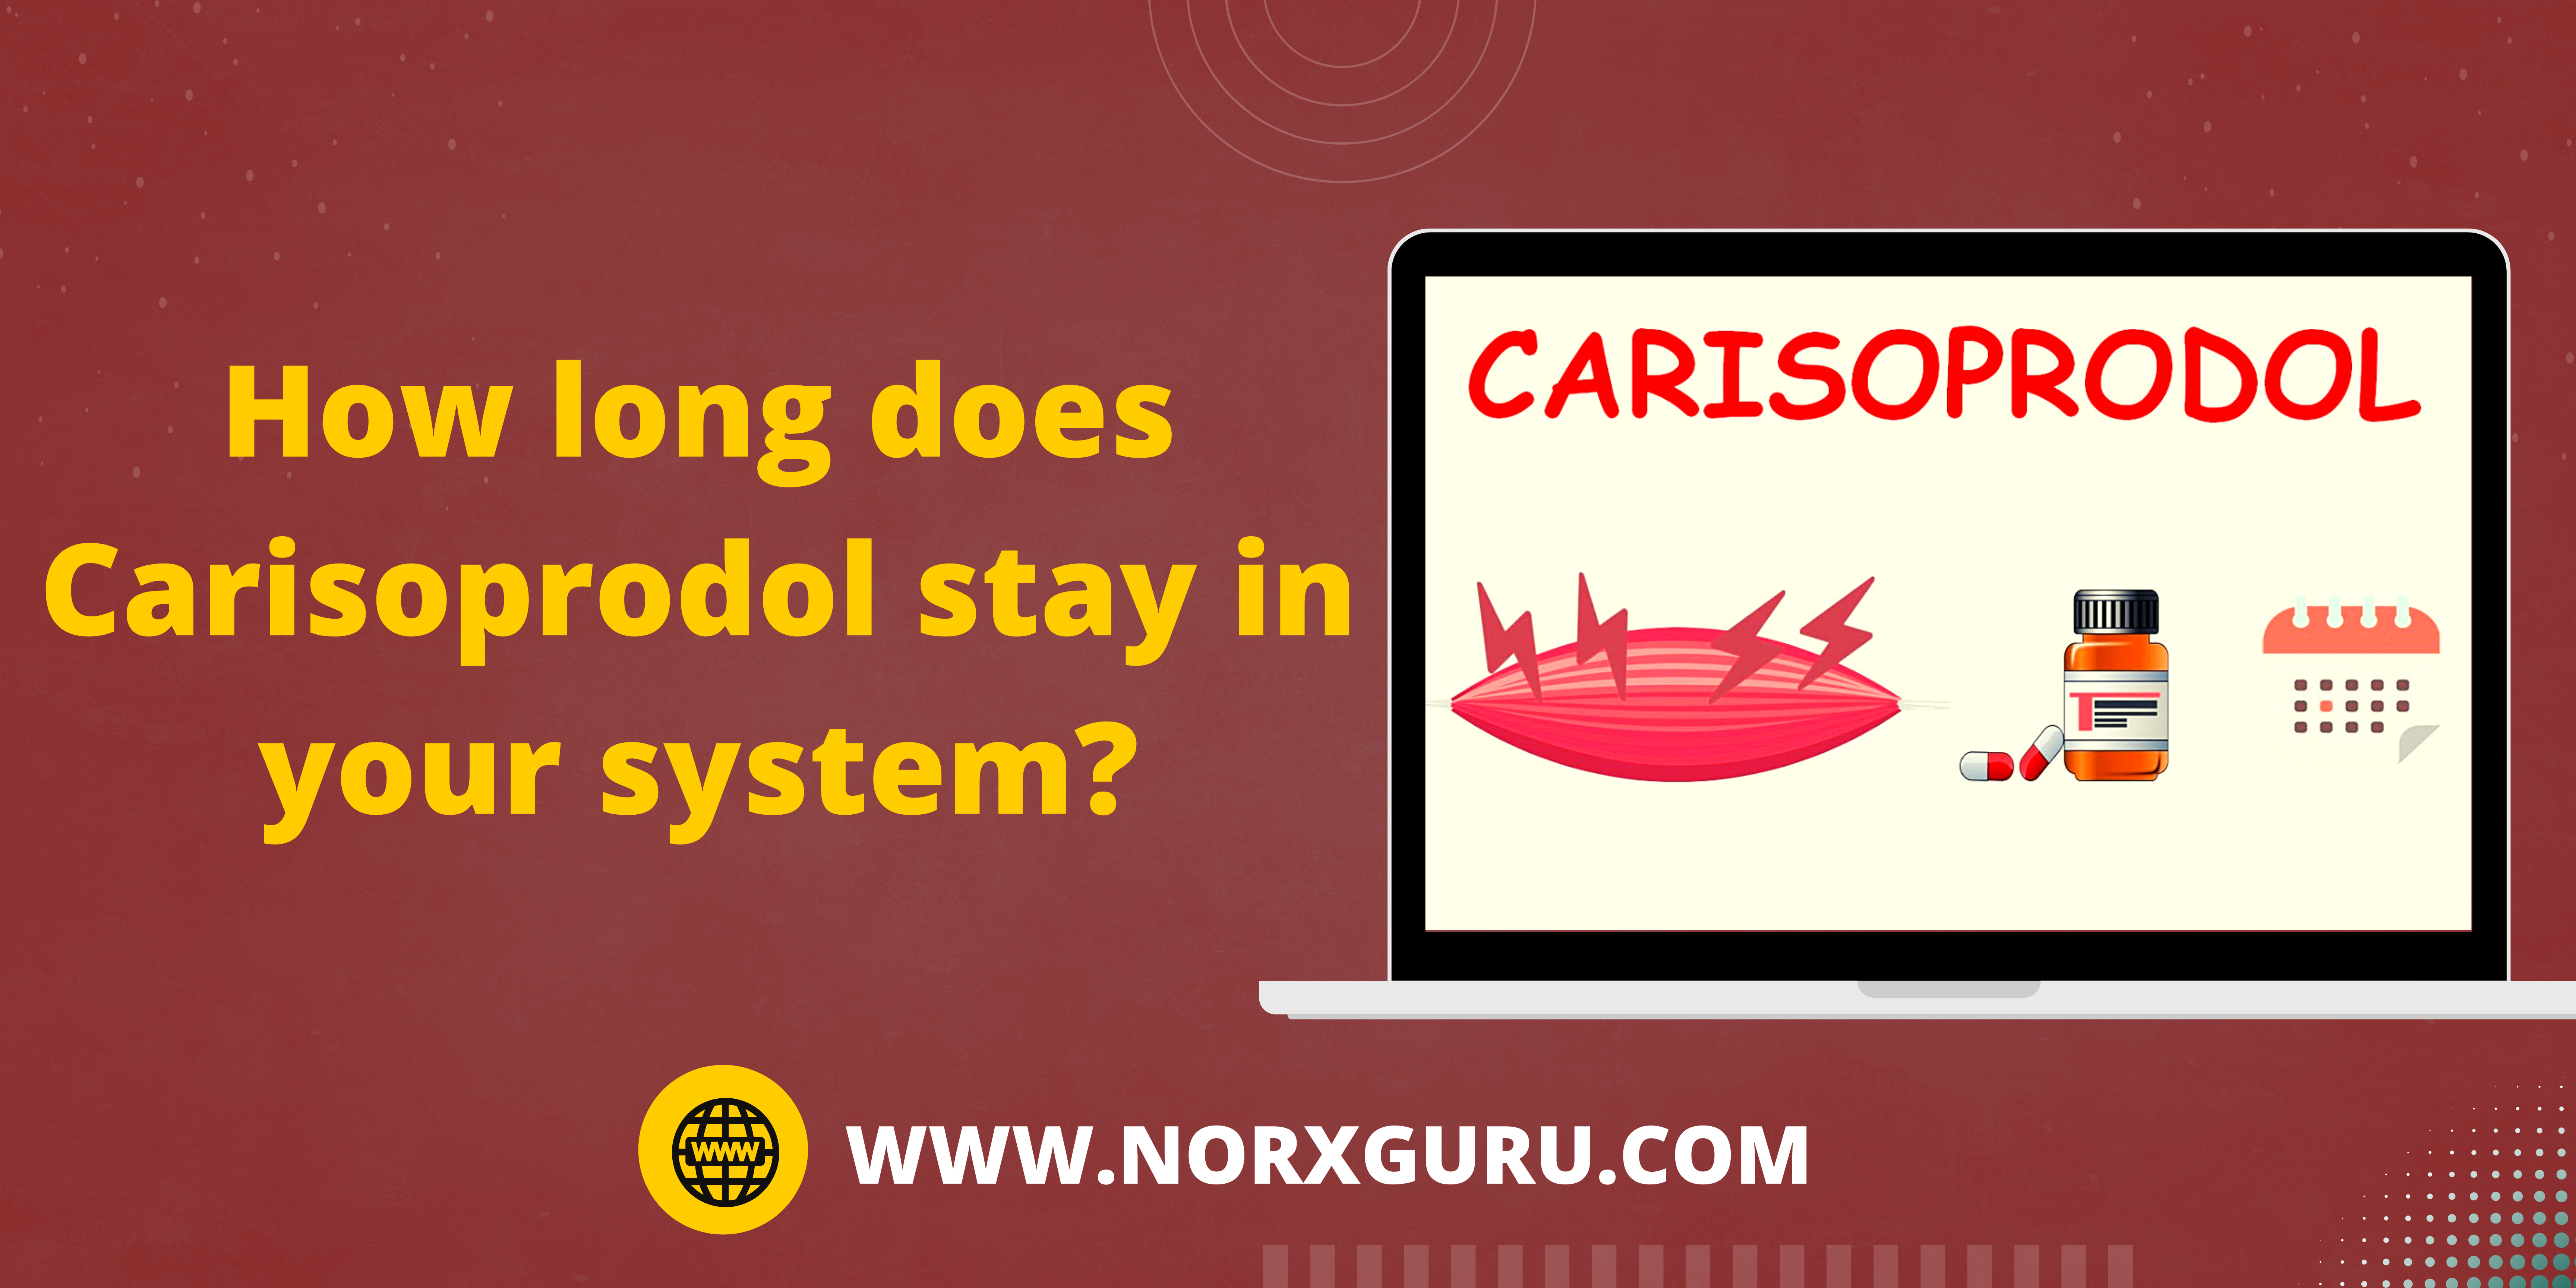 How long does Carisoprodol stay in your system?